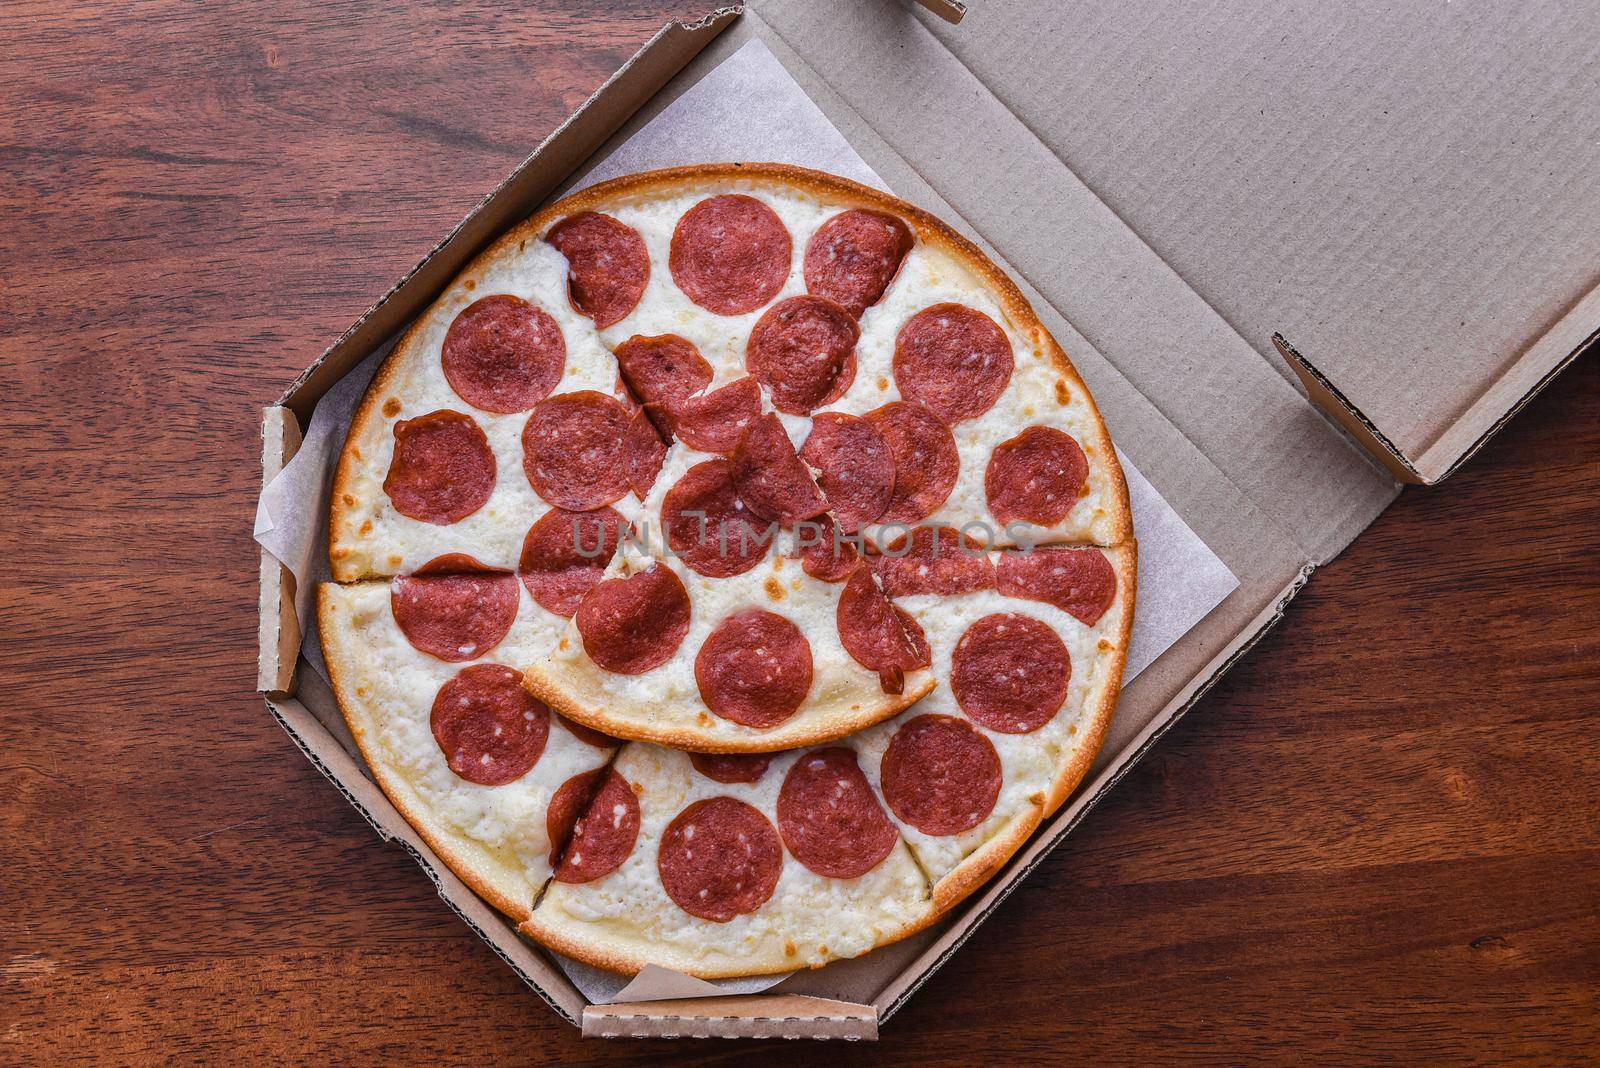 Pepperoni Pizza in open carton box on wooden table, closeup, top view.